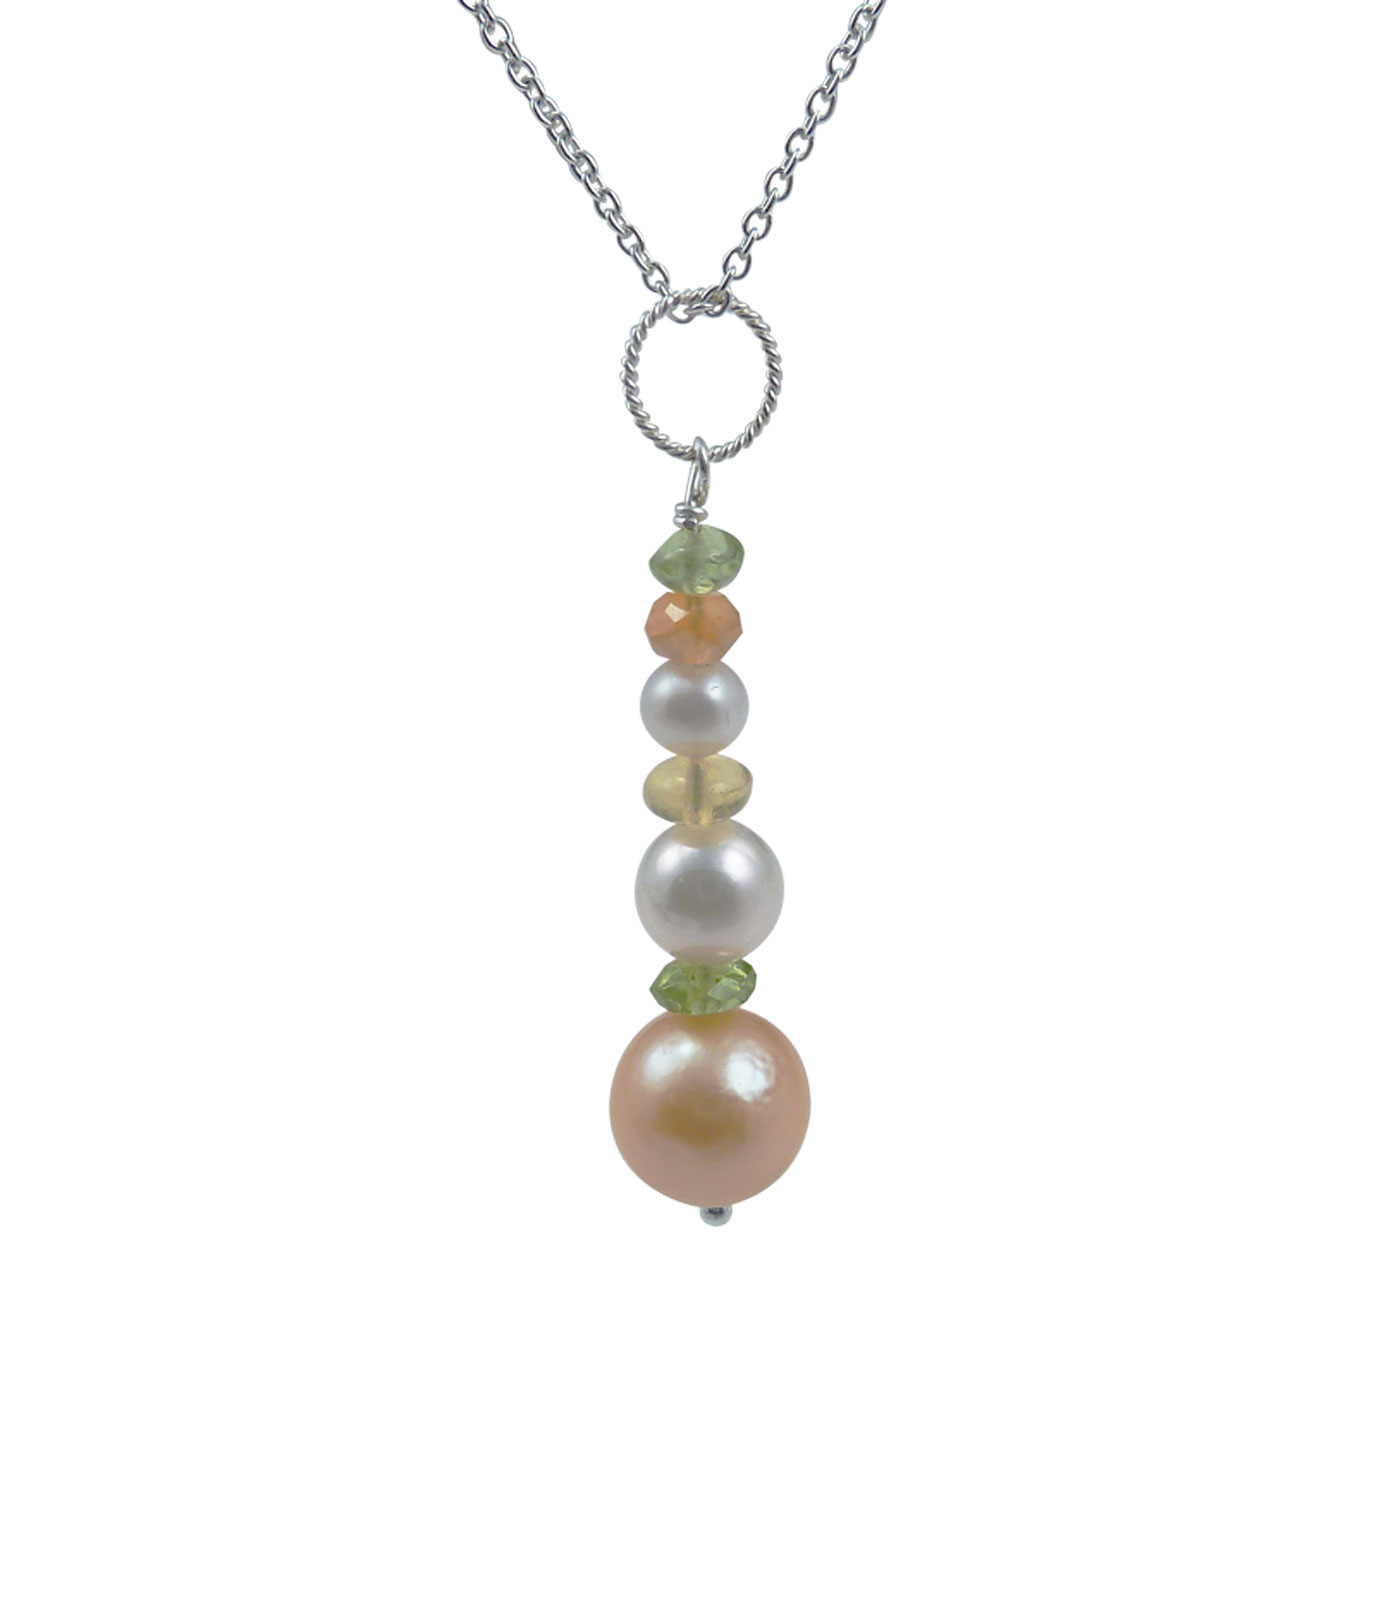 Pearl pendant necklace gemsas accent. Modern pearl jewelry